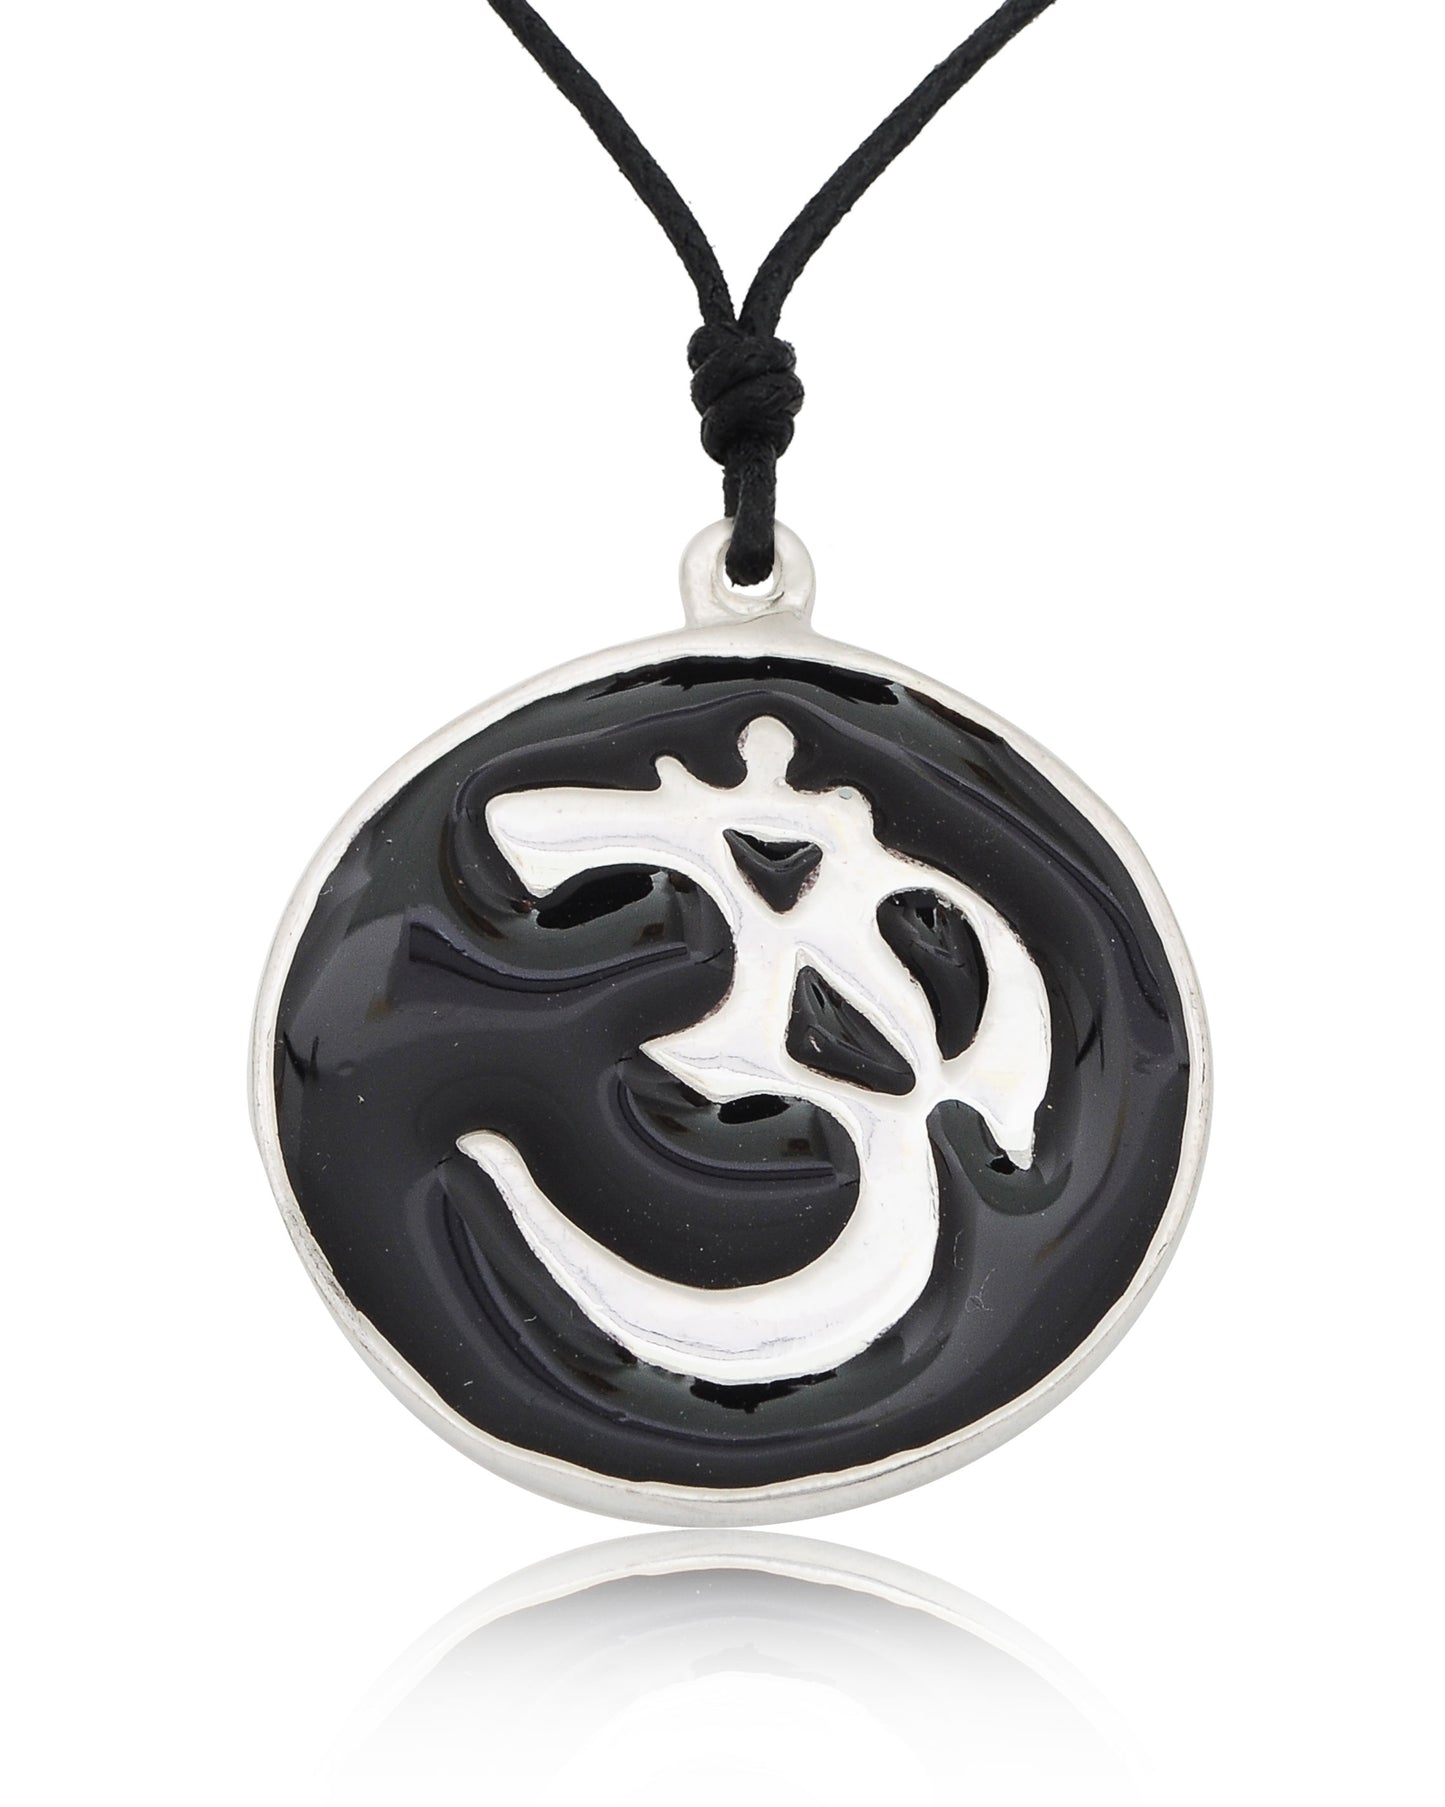 Trendy Hindu Symbol Silver Pewter Charm Necklace Pendant Jewelry